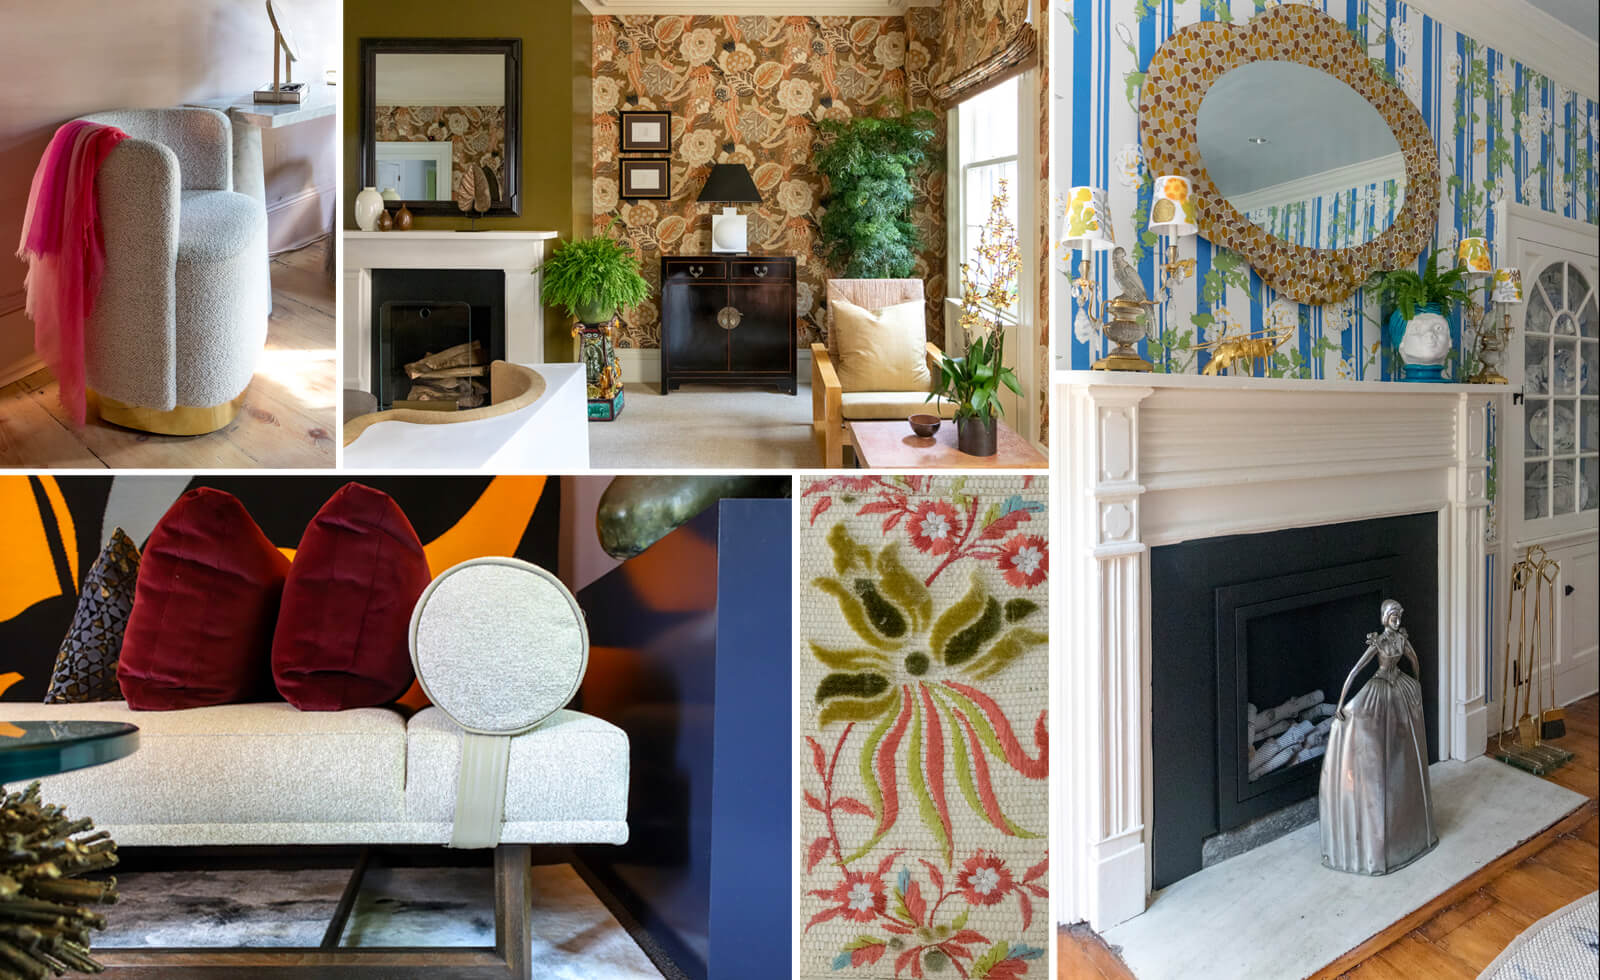 Designer Showhouse Brings Color Bold Design To Historic